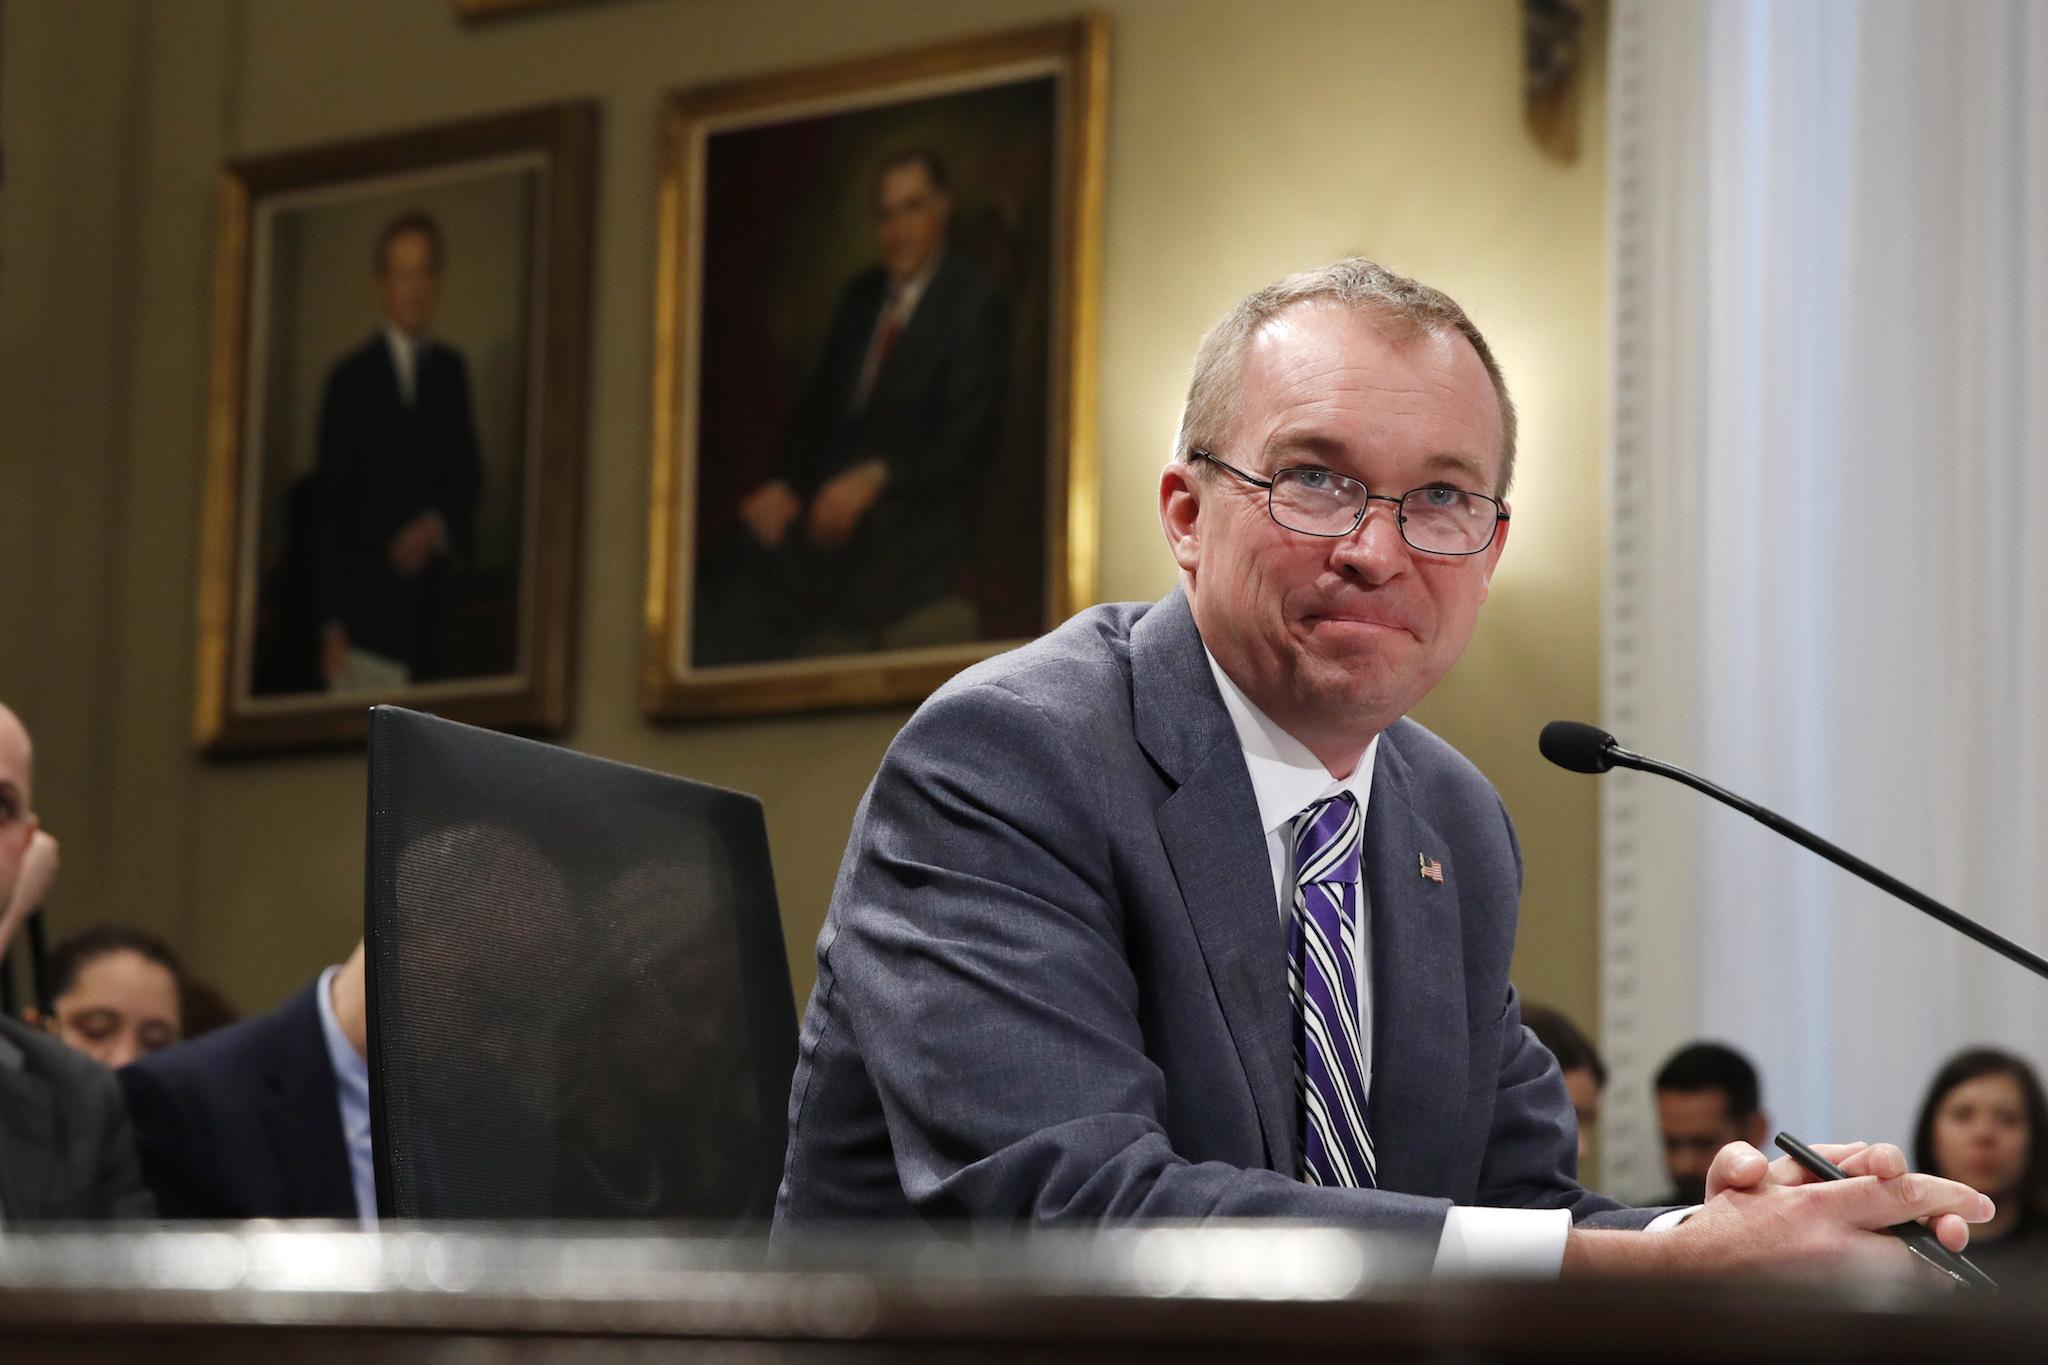 Budget Director Mick Mulvaney defended the cuts as ways to reduce the government's debt and balance the budget